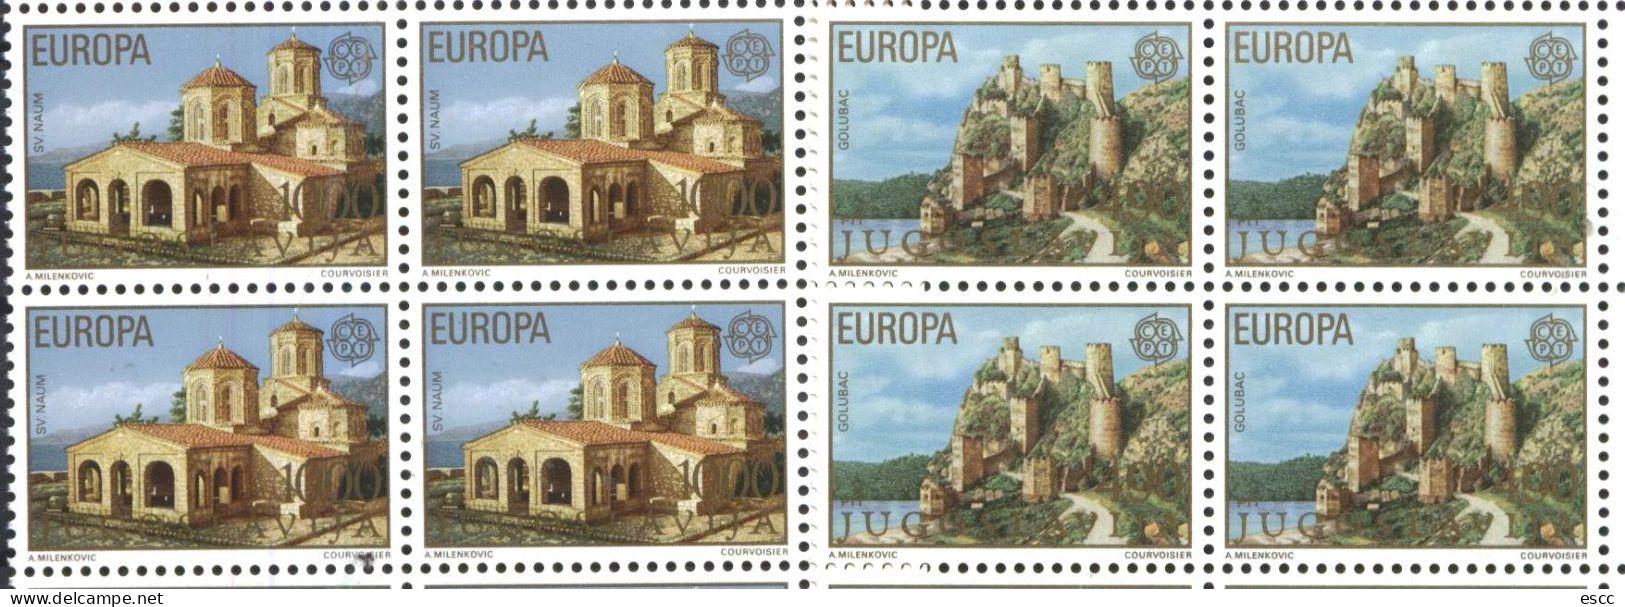 Mint  Stamps In Blocks  Europa CEPT 1978 From Yugoslavia - 1978